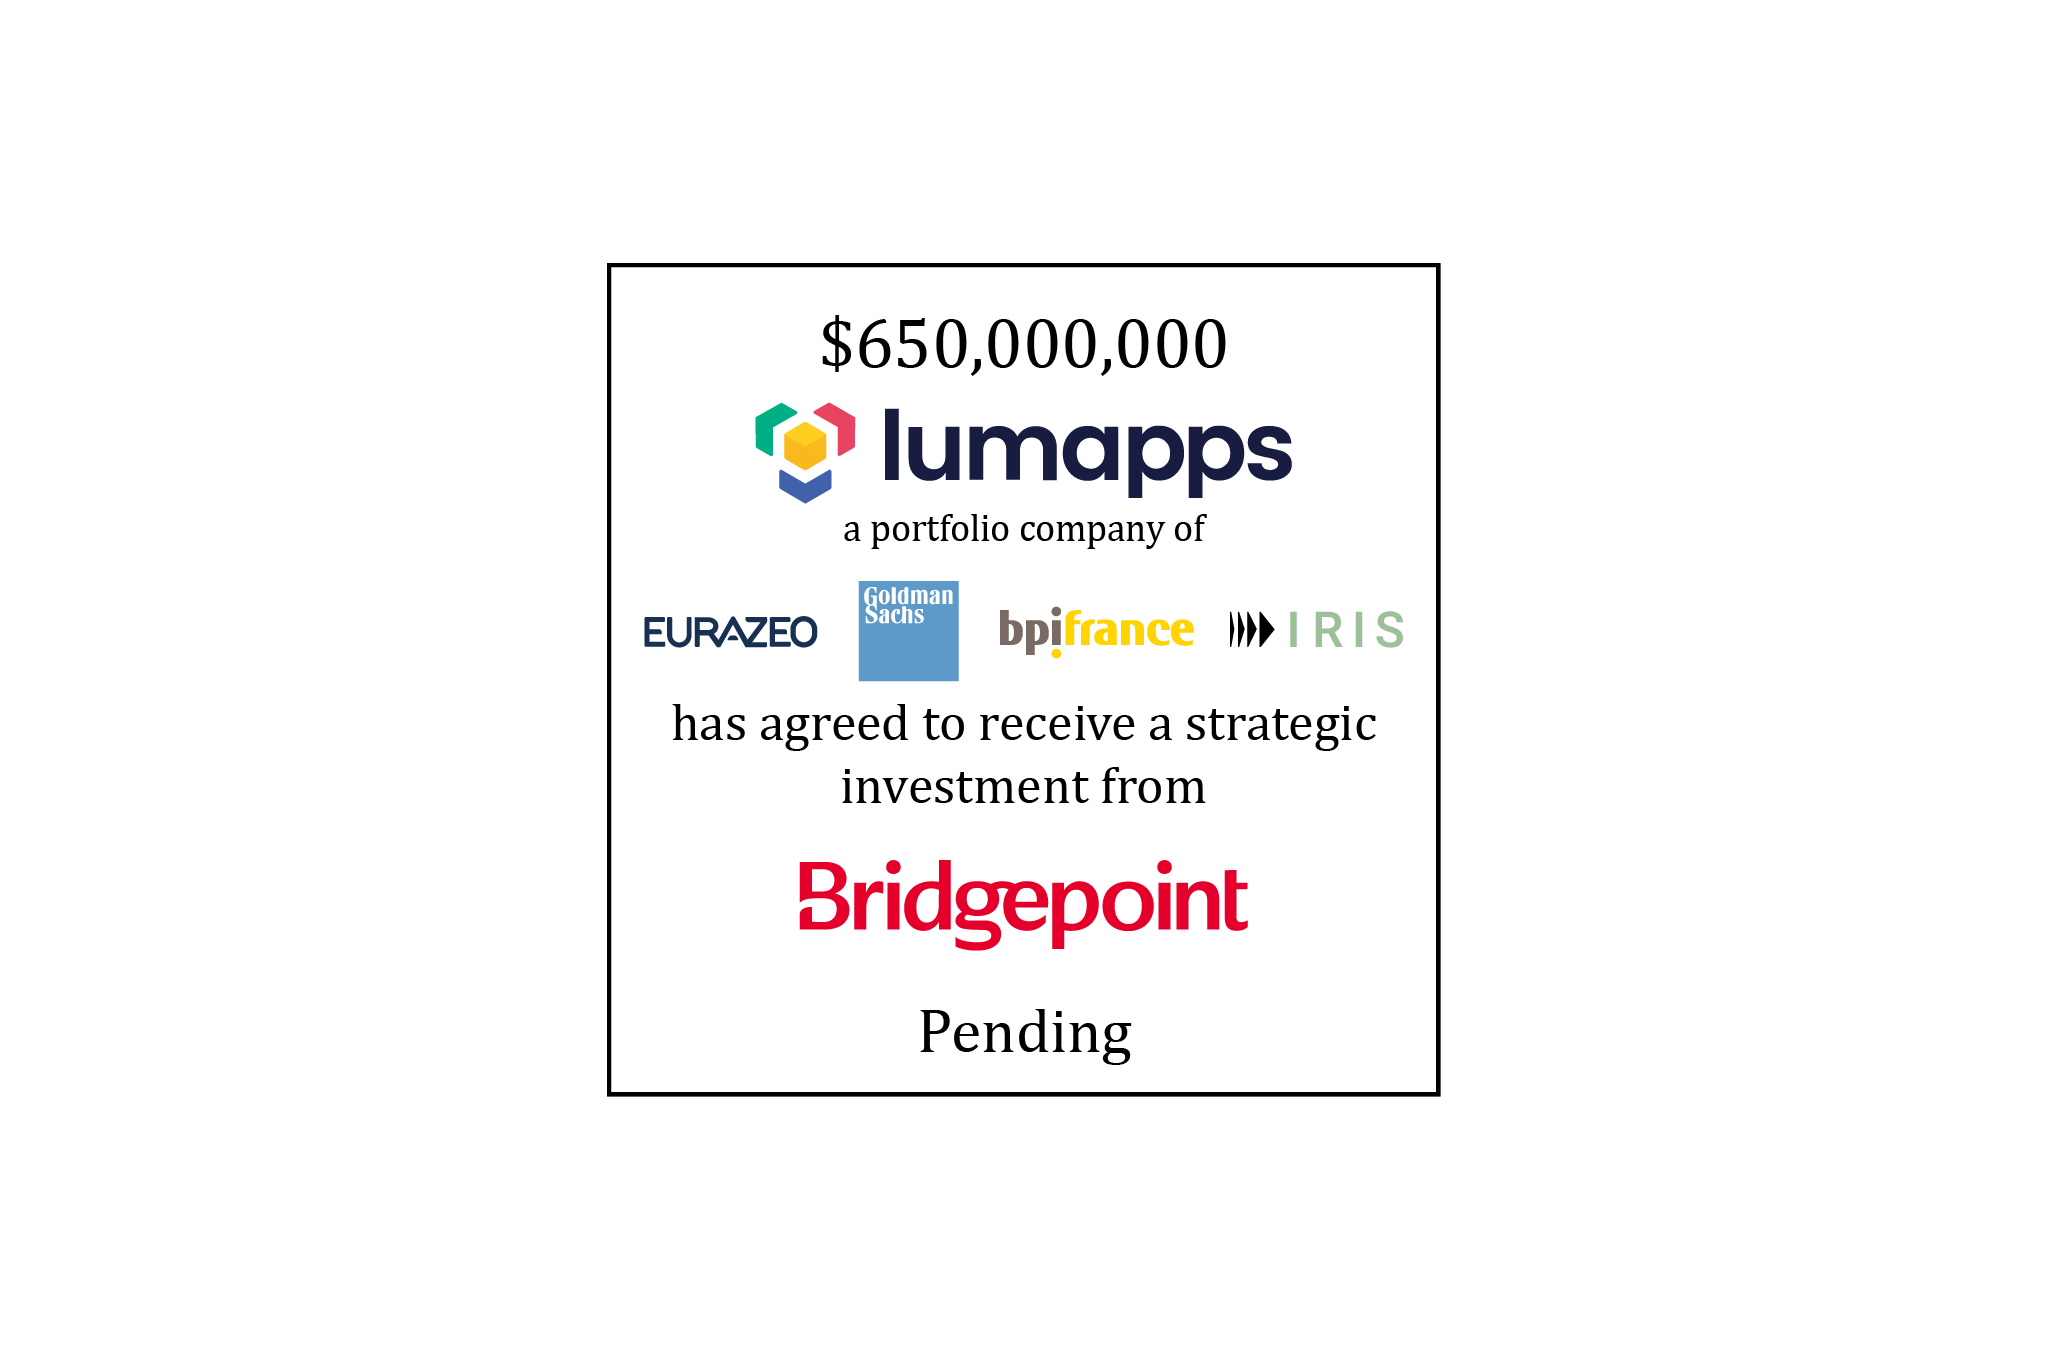 $650,000,000 | LumApps (logo), a portfolio company of Eurazeo, Goldman Sachs Growth, Bpifrance, and IRIS Capital Group, has agreed to receive a strategic investment from Bridgepoint Group (logo) | Pending